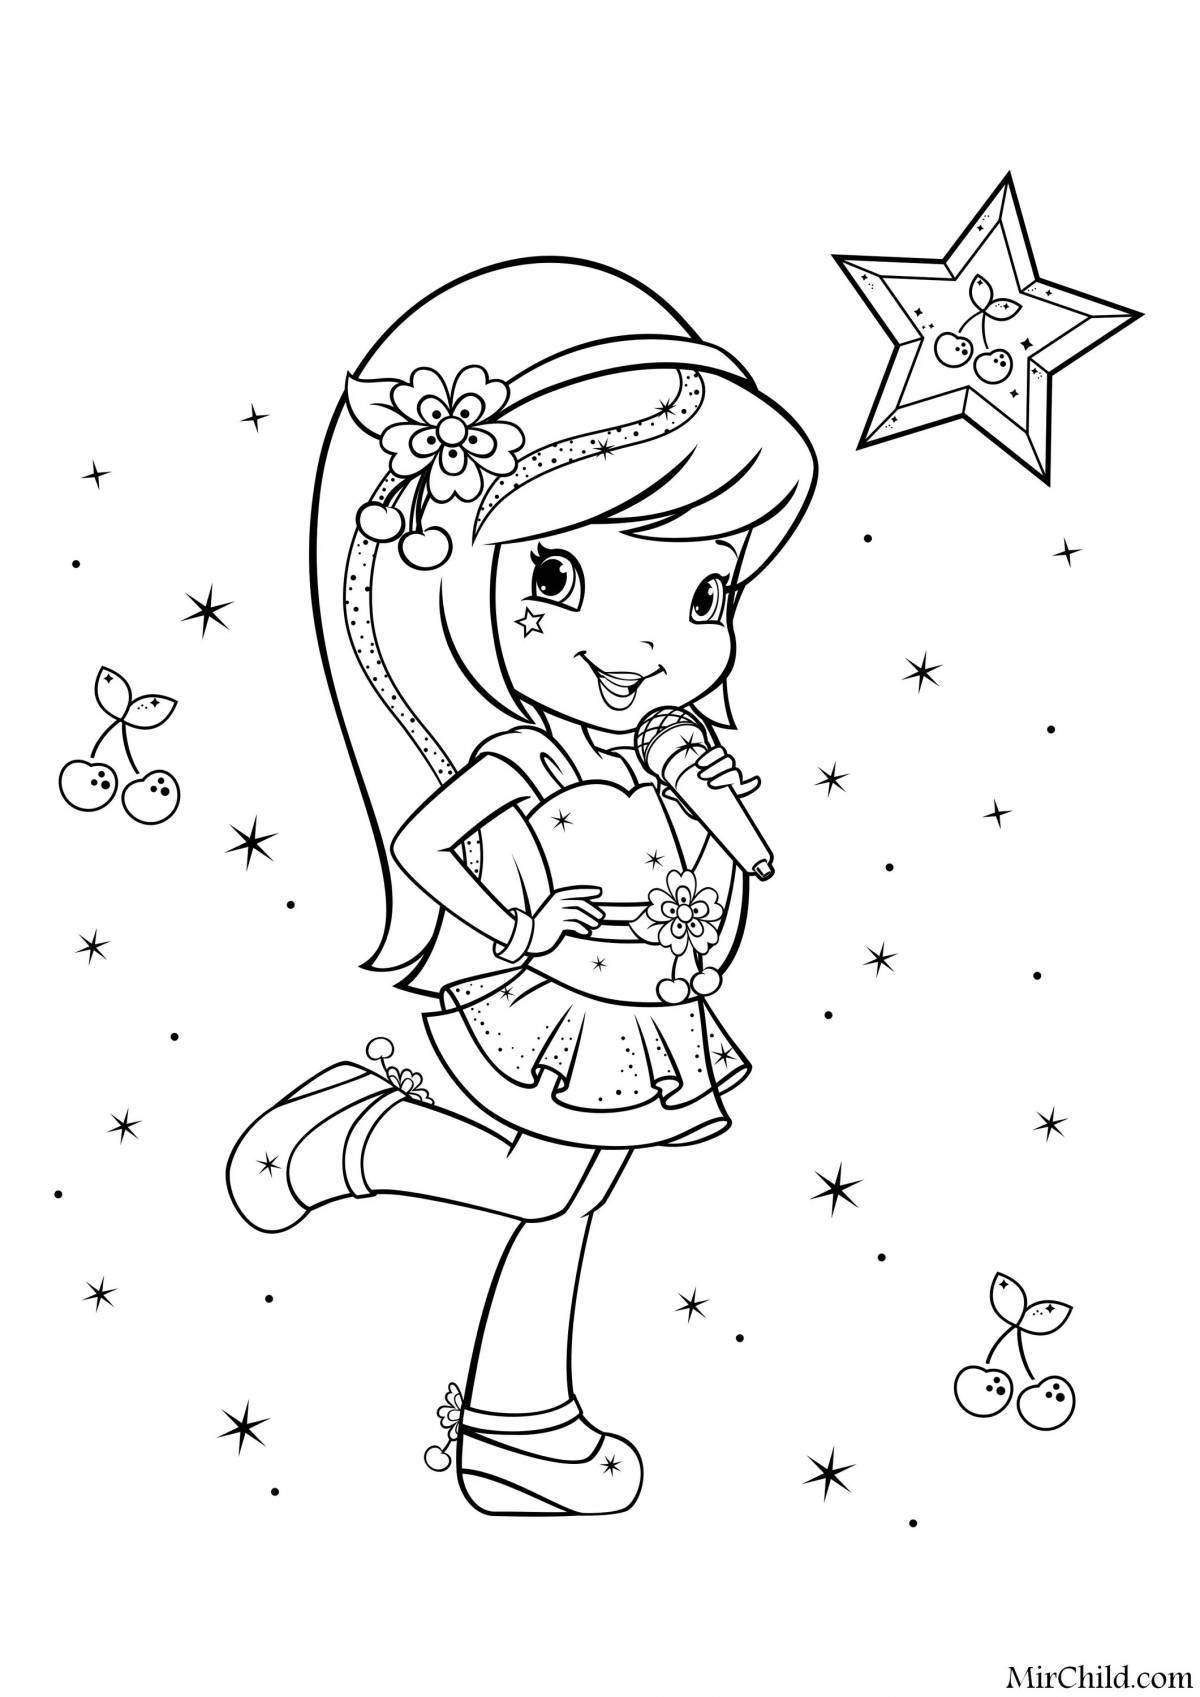 Wonderful charlotte strawberry coloring book for girls